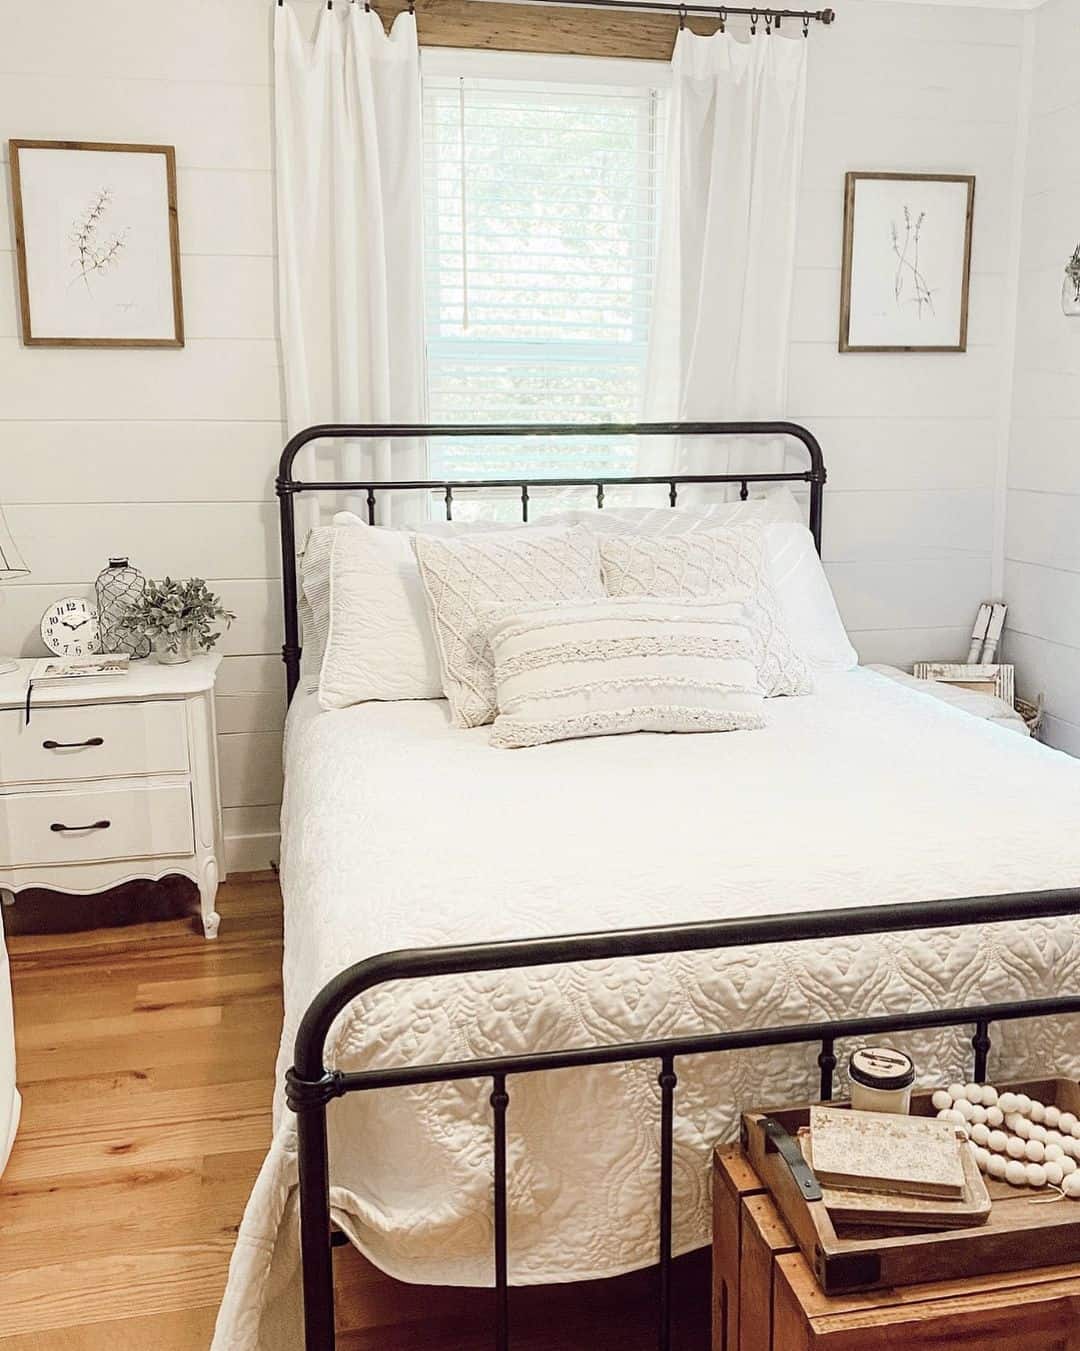 30 charming small guest bedroom ideas for a cozy space